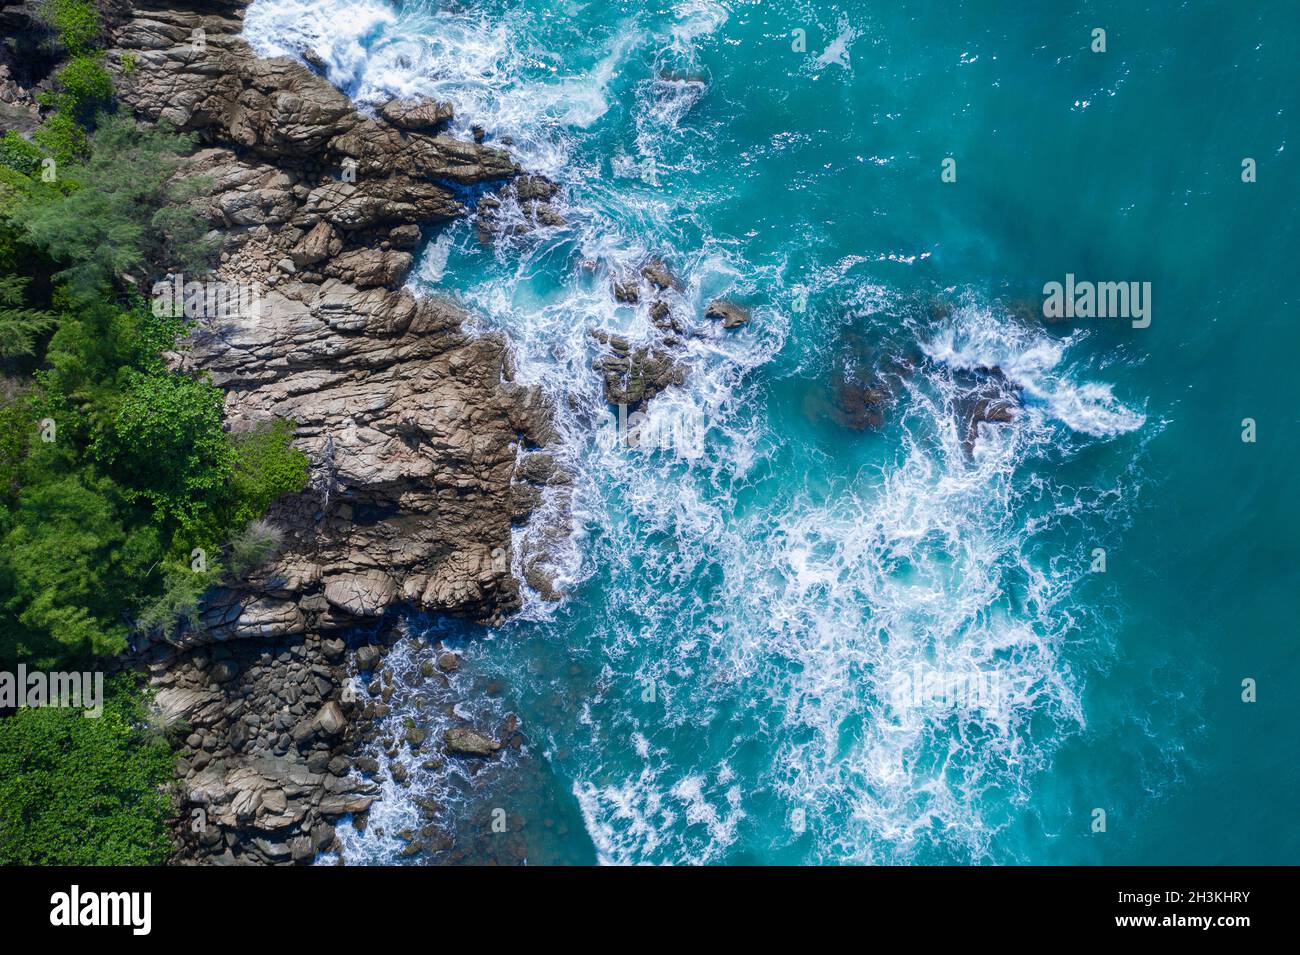 Aerial top view of ocean's beautiful waves crashing on the rocky island coast Stock Photo